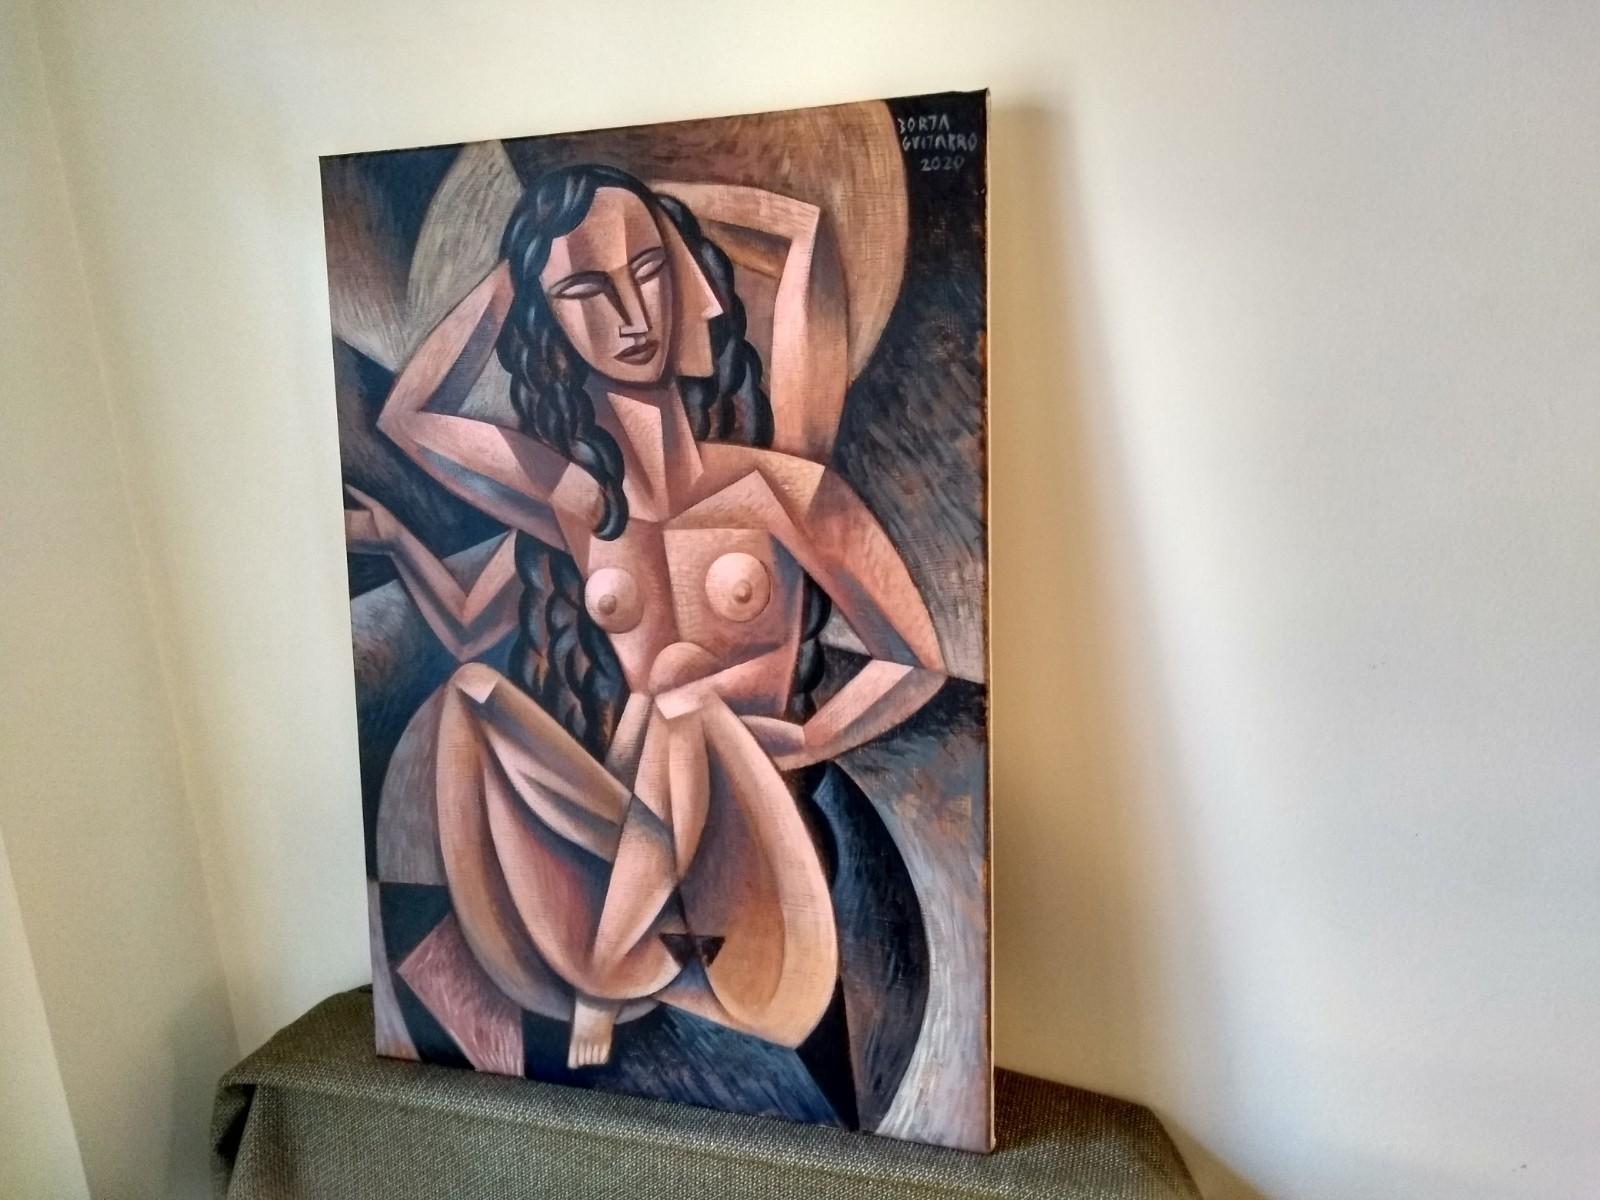 Nude - original naked female figure modern study abstract cubism form painting - Painting by Borja Guijarro